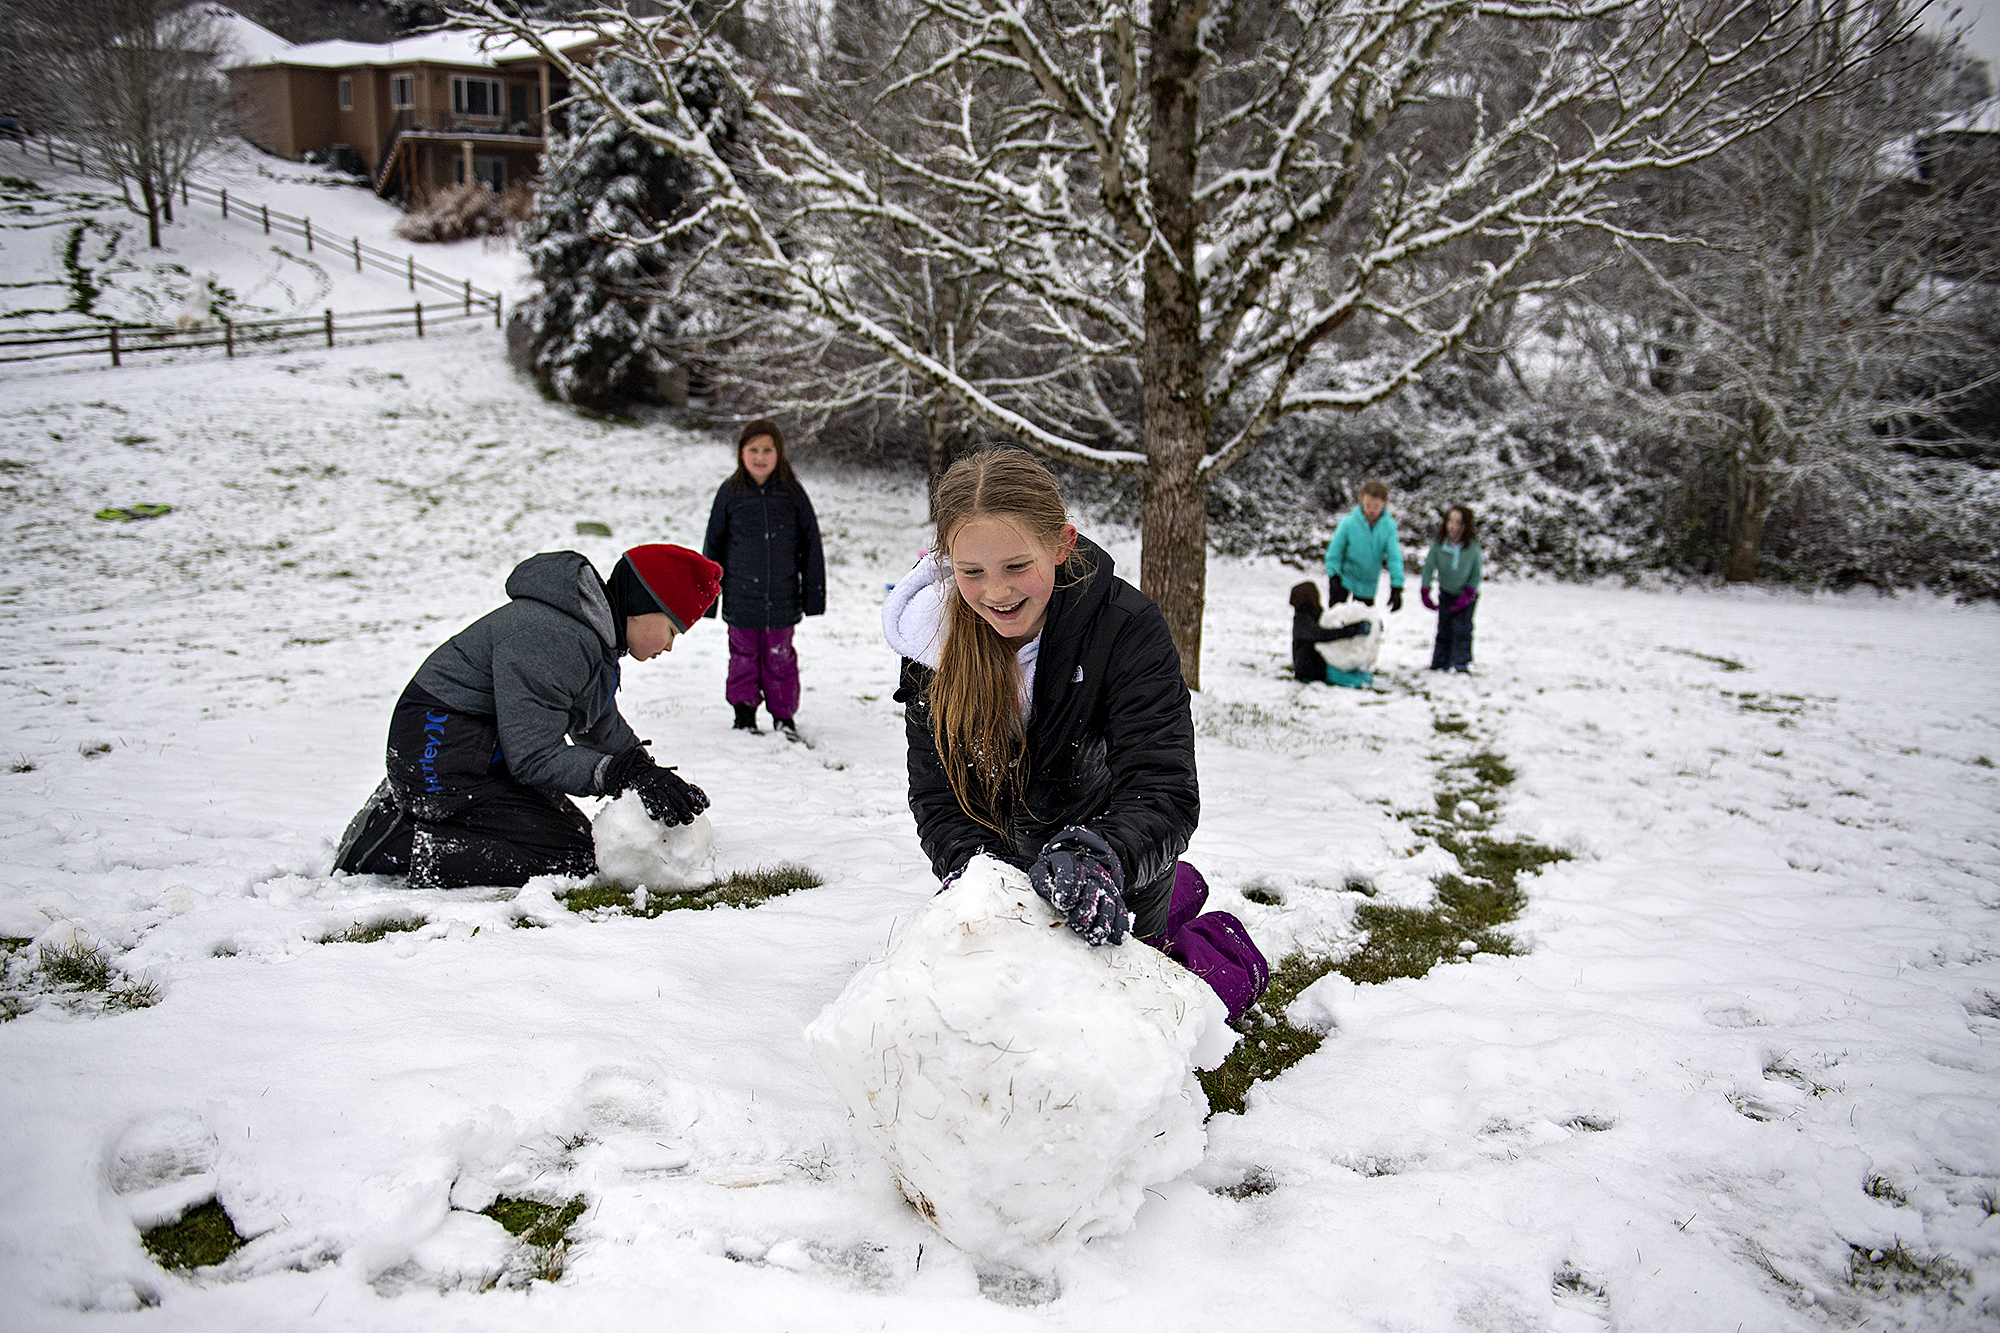 Ryder Sorensen, 10, of Vancouver, red hat on left, joins Elsie Frost, 9, and others as they make the most of the snowfall at a park in Felida's Ashley Heights neighborhood on Tuesday morning, Dec. 28, 2021.